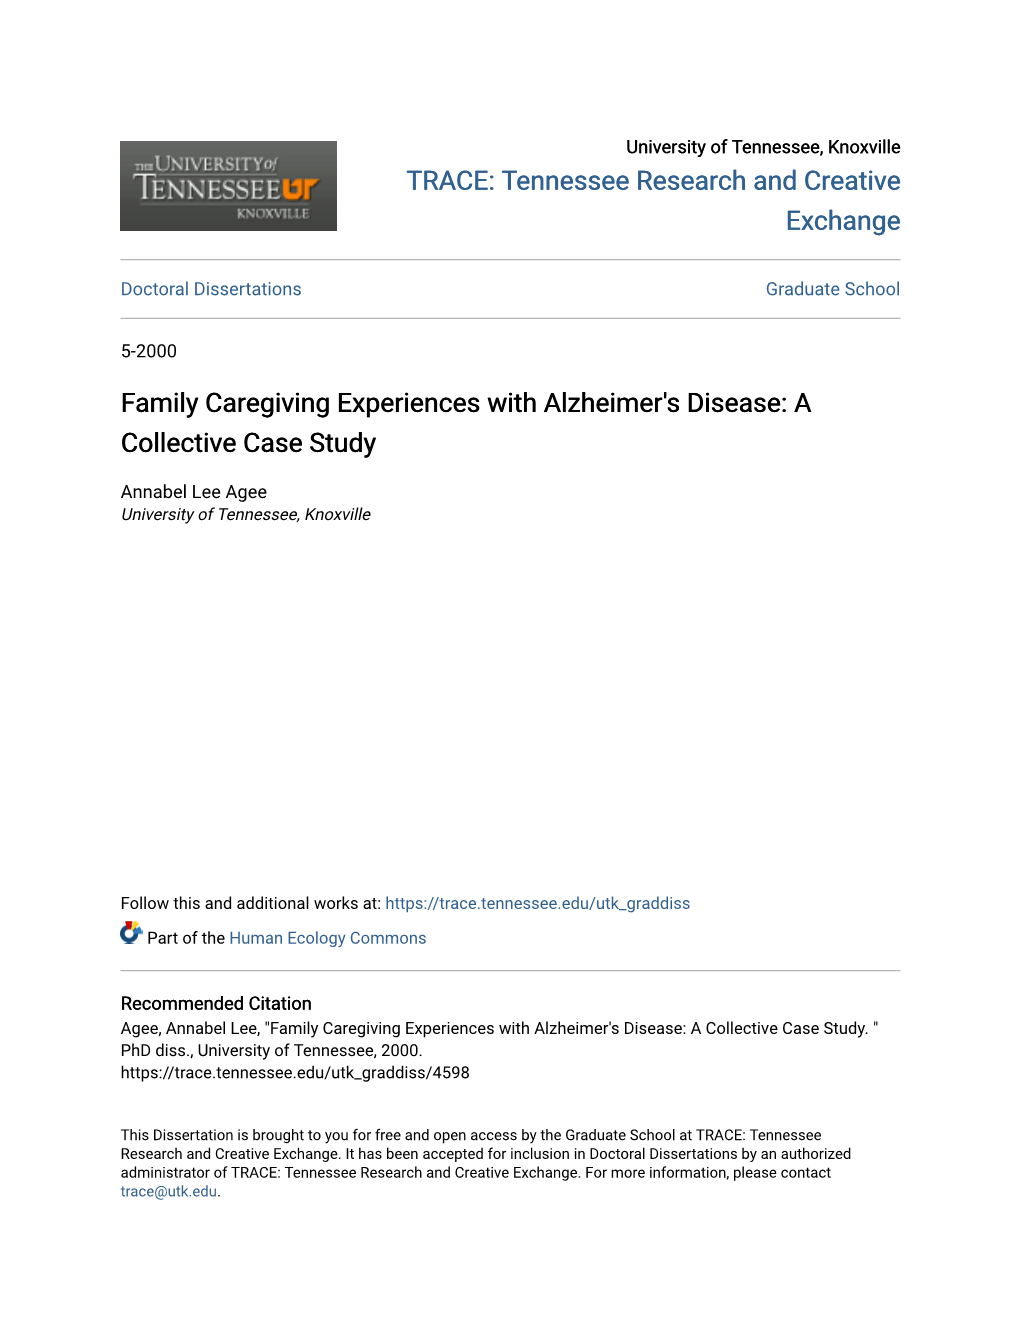 Family Caregiving Experiences with Alzheimer's Disease: a Collective Case Study